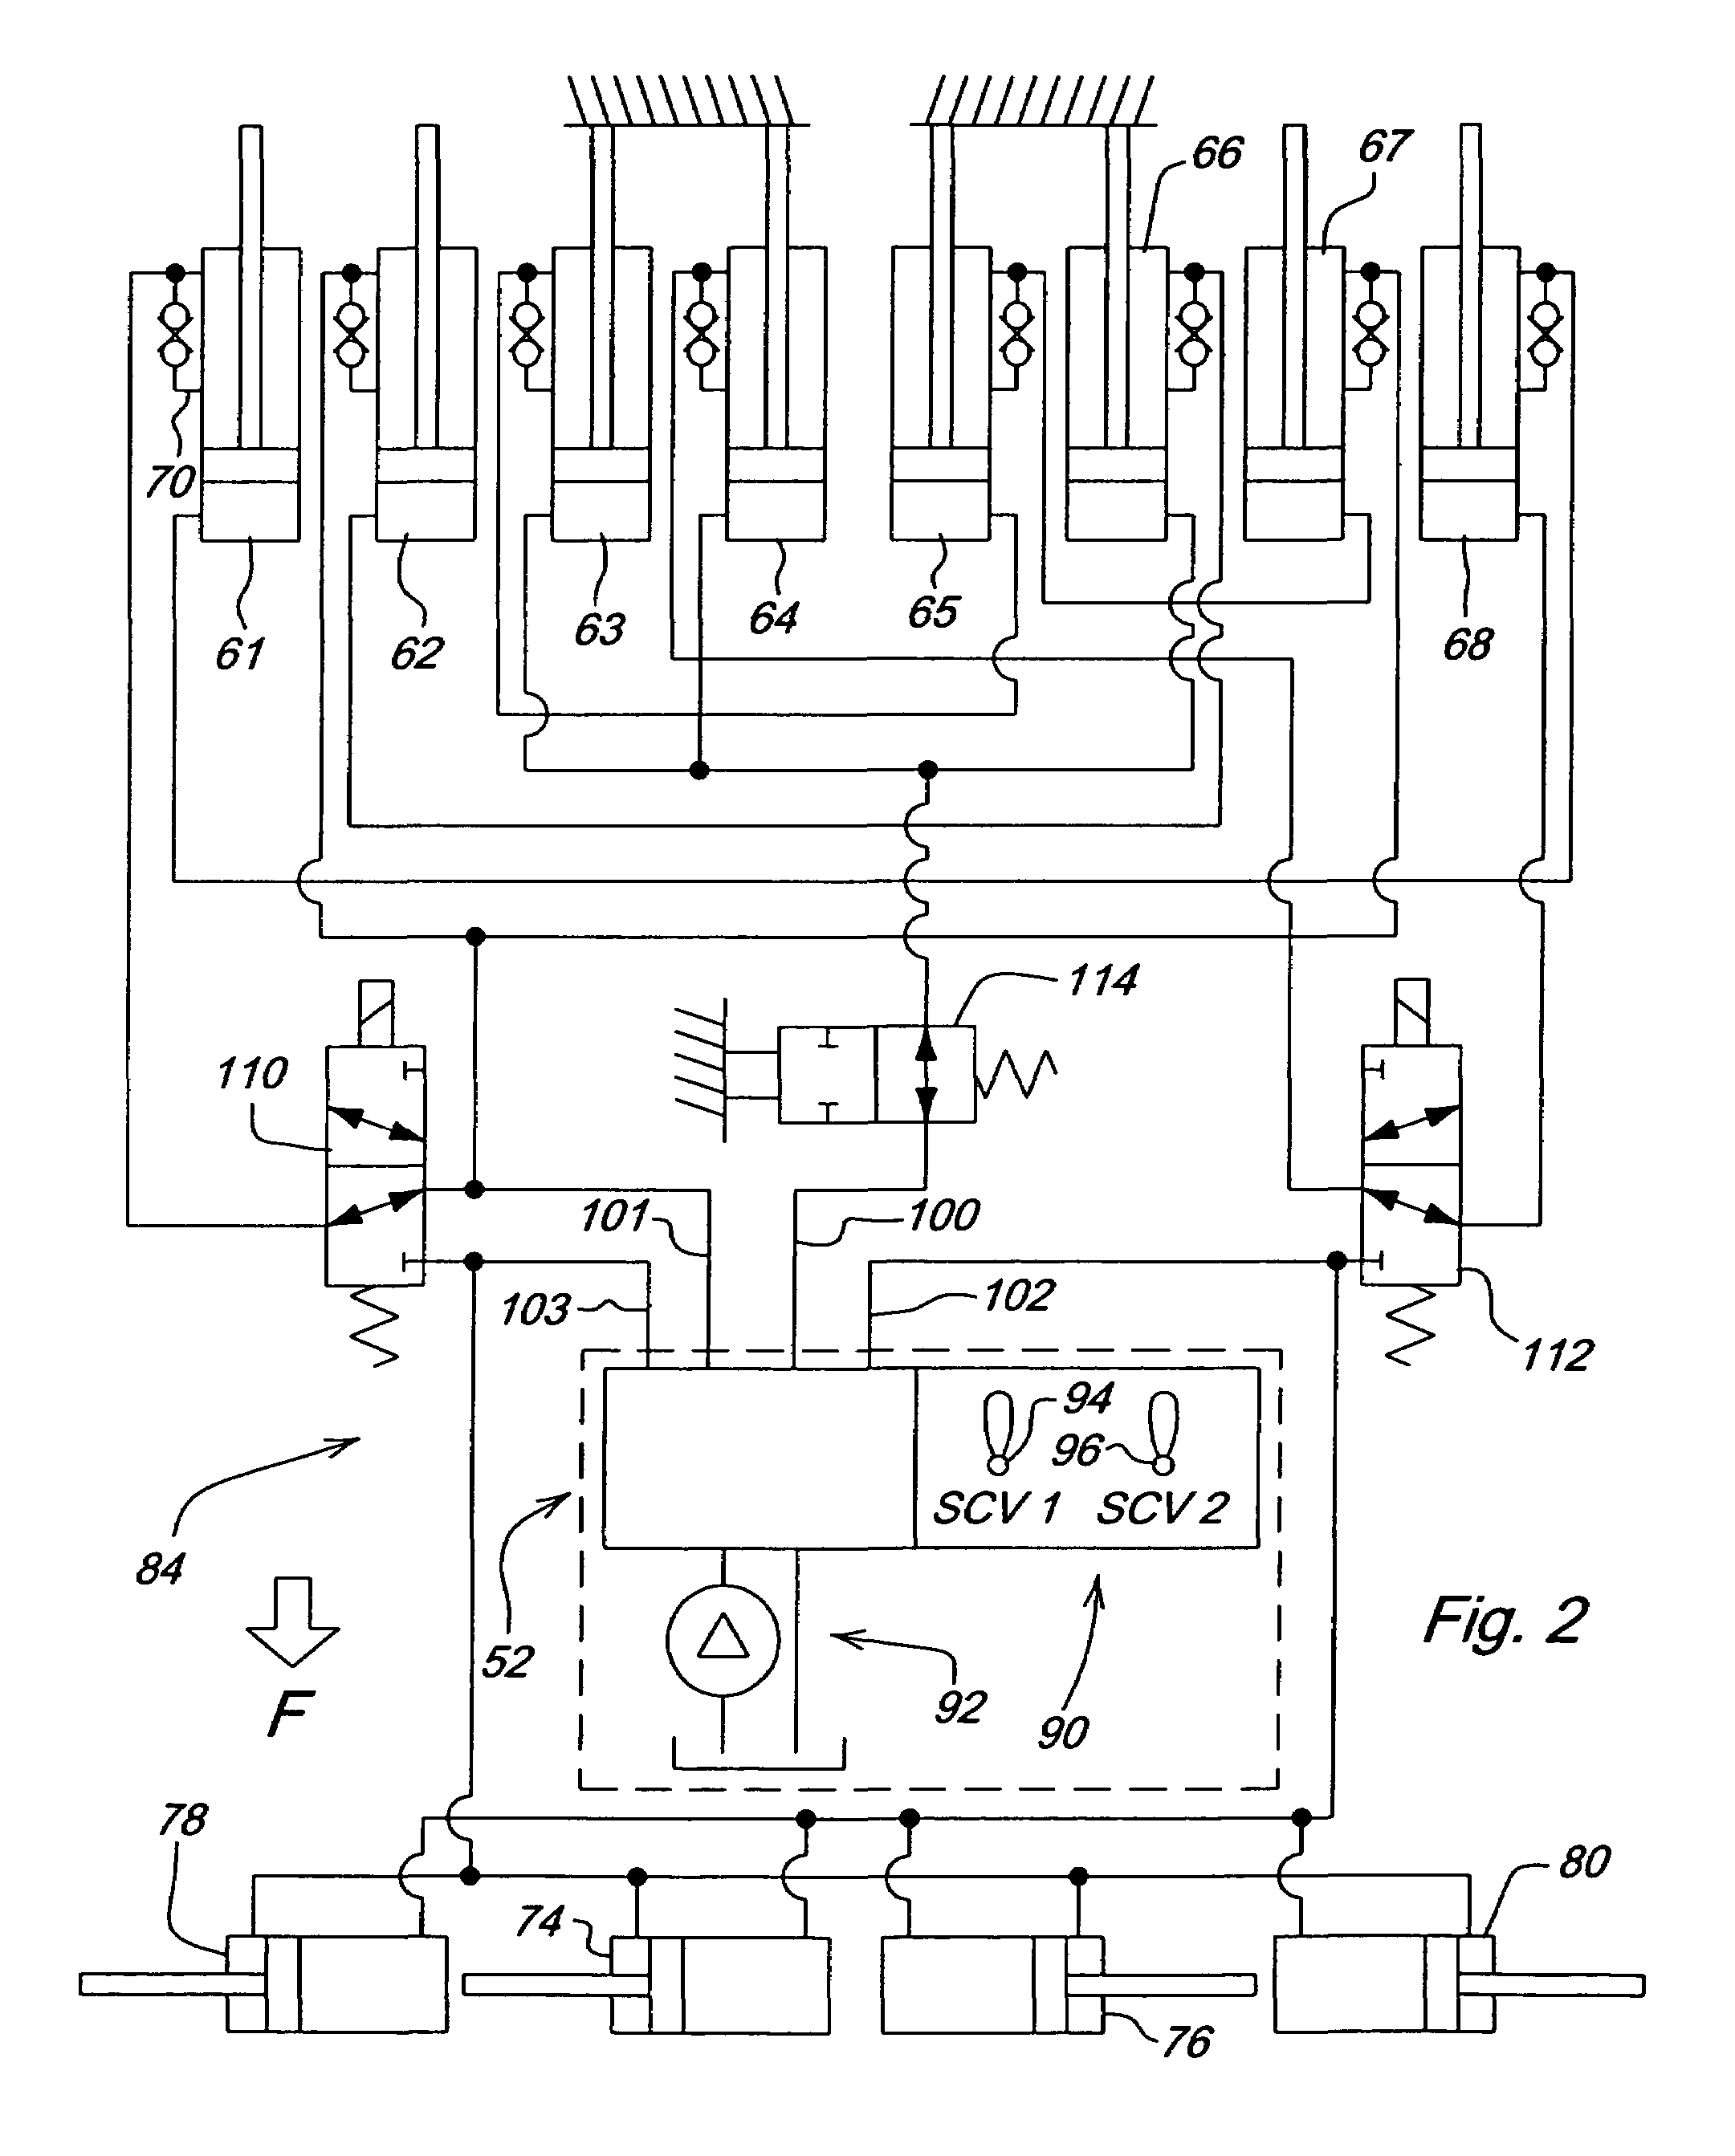 Cylinder synchronization for an implement lift system